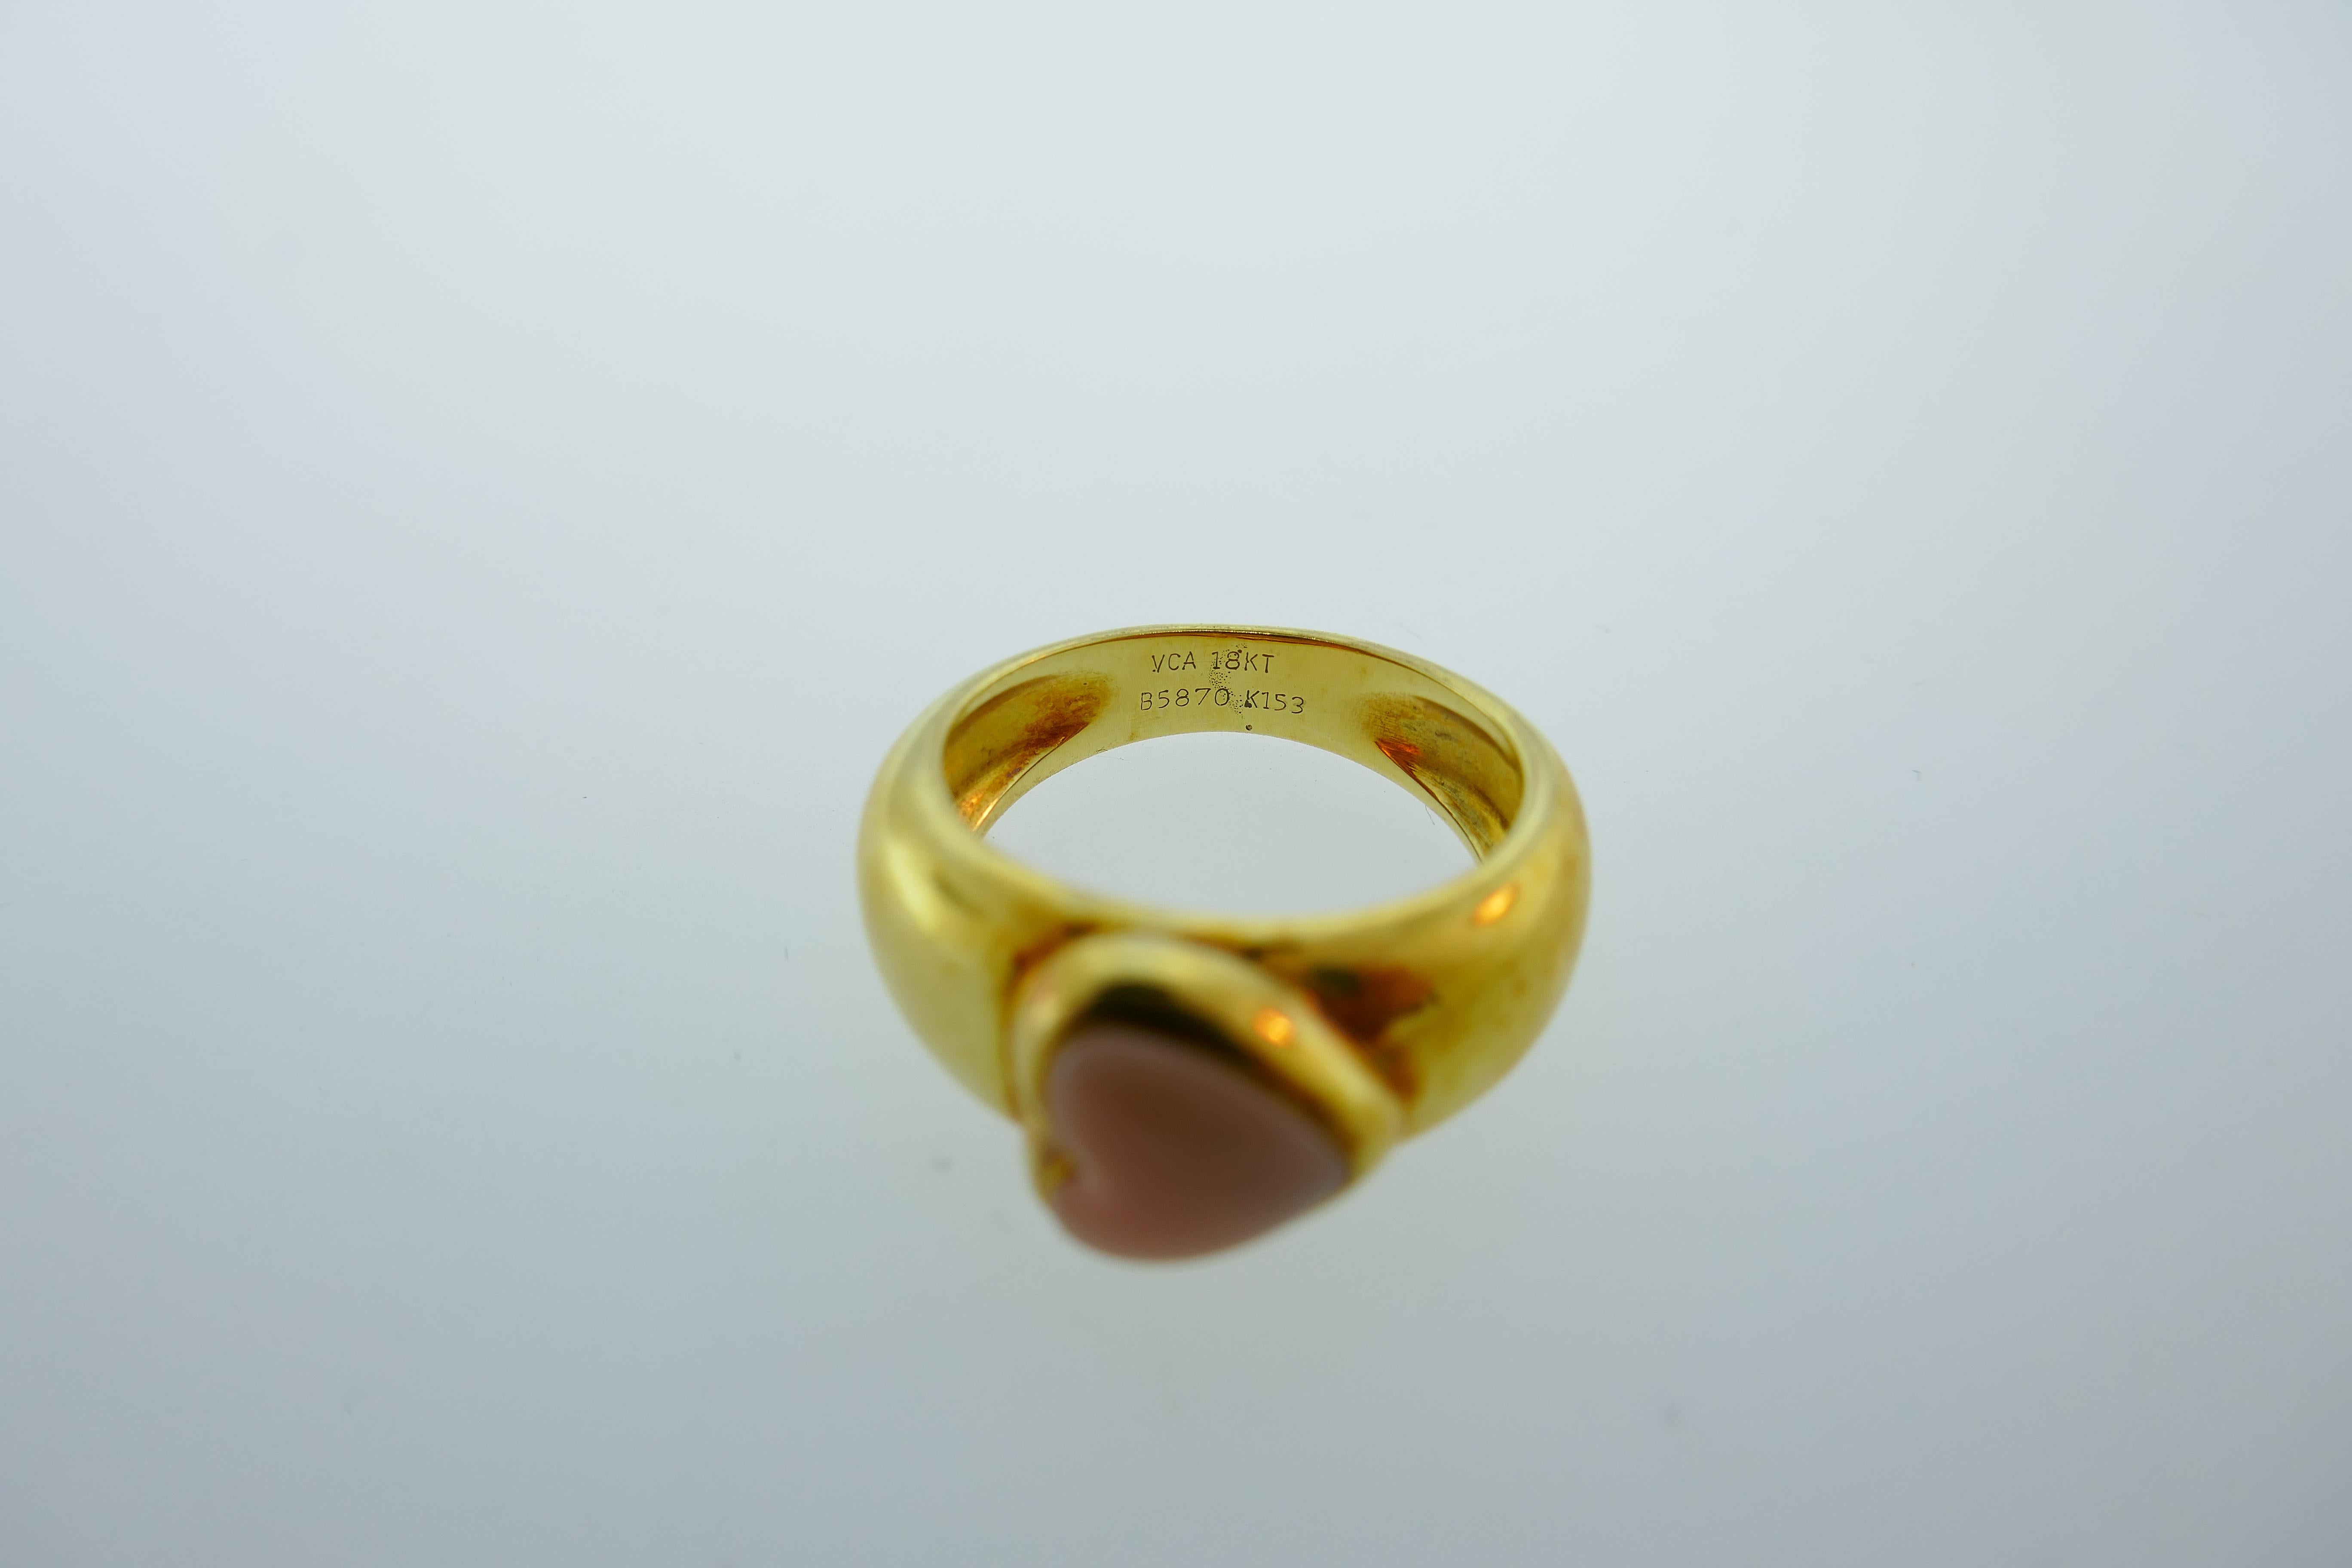 
Here is your chance to purchase a beautiful and highly collectible designer ring.  Truly a great piece at a great price! 

Weight: 6.9 grams

Dimensions: 3/4